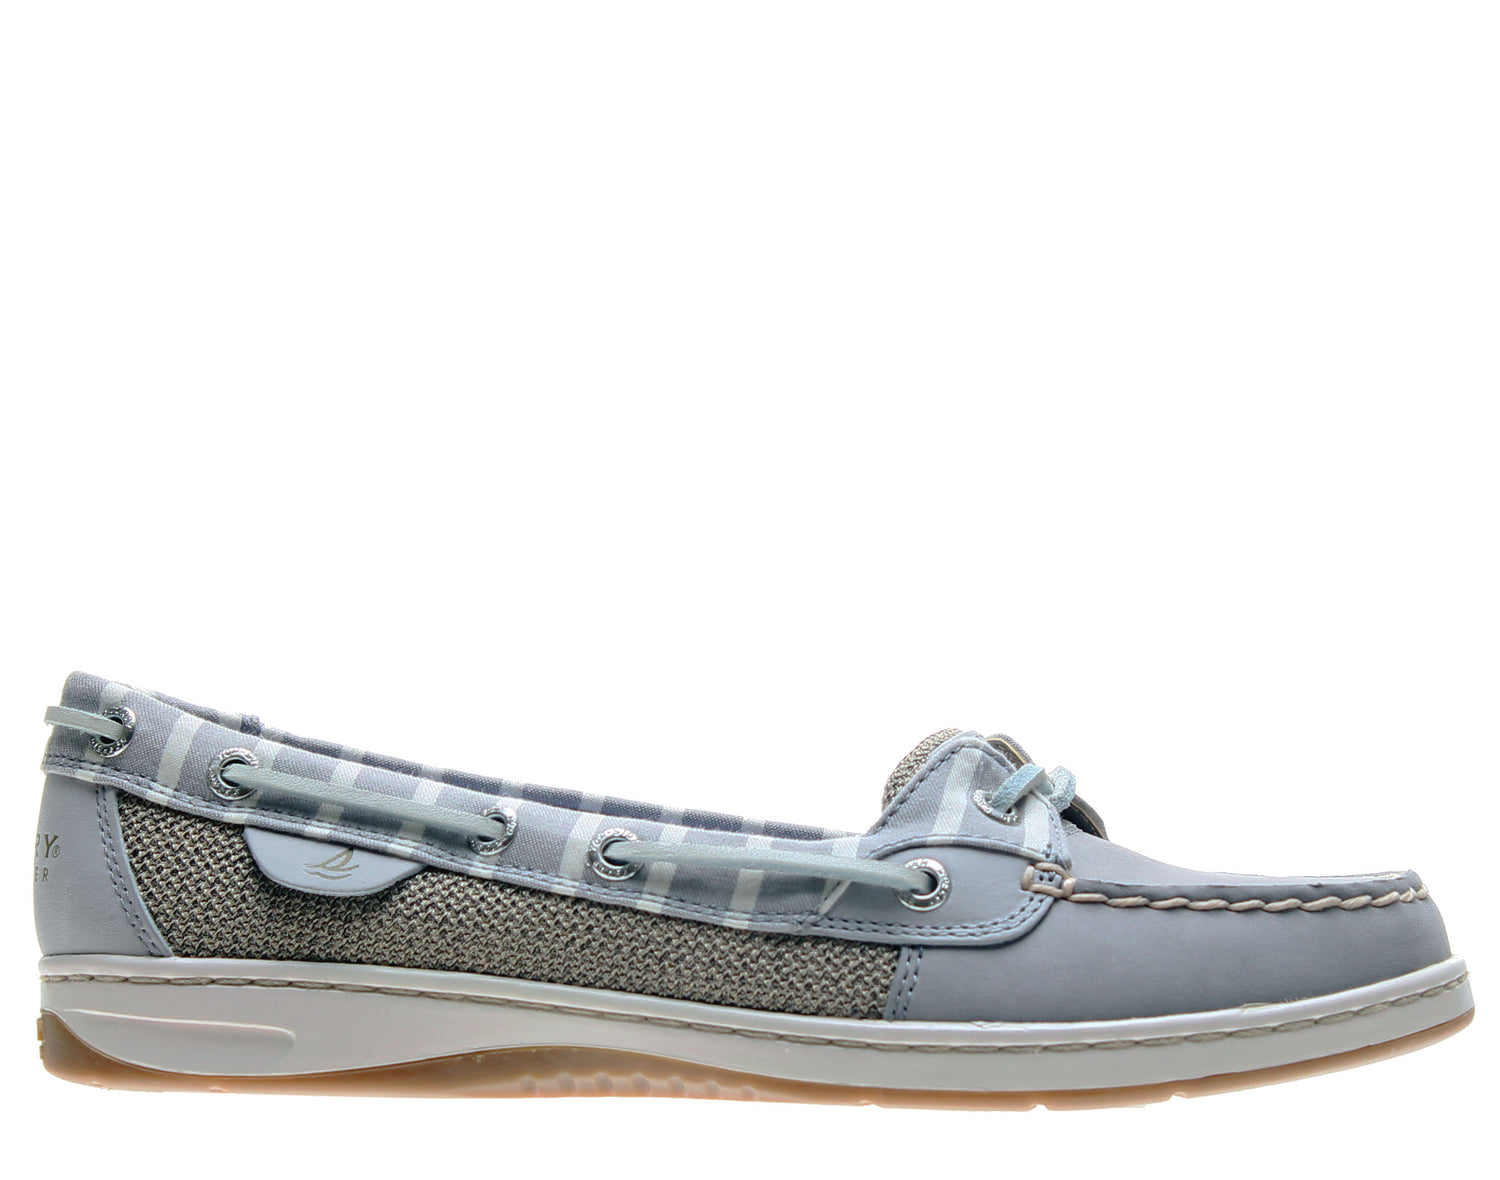 Sperry Top Sider Angelfish Women's Boat Shoes